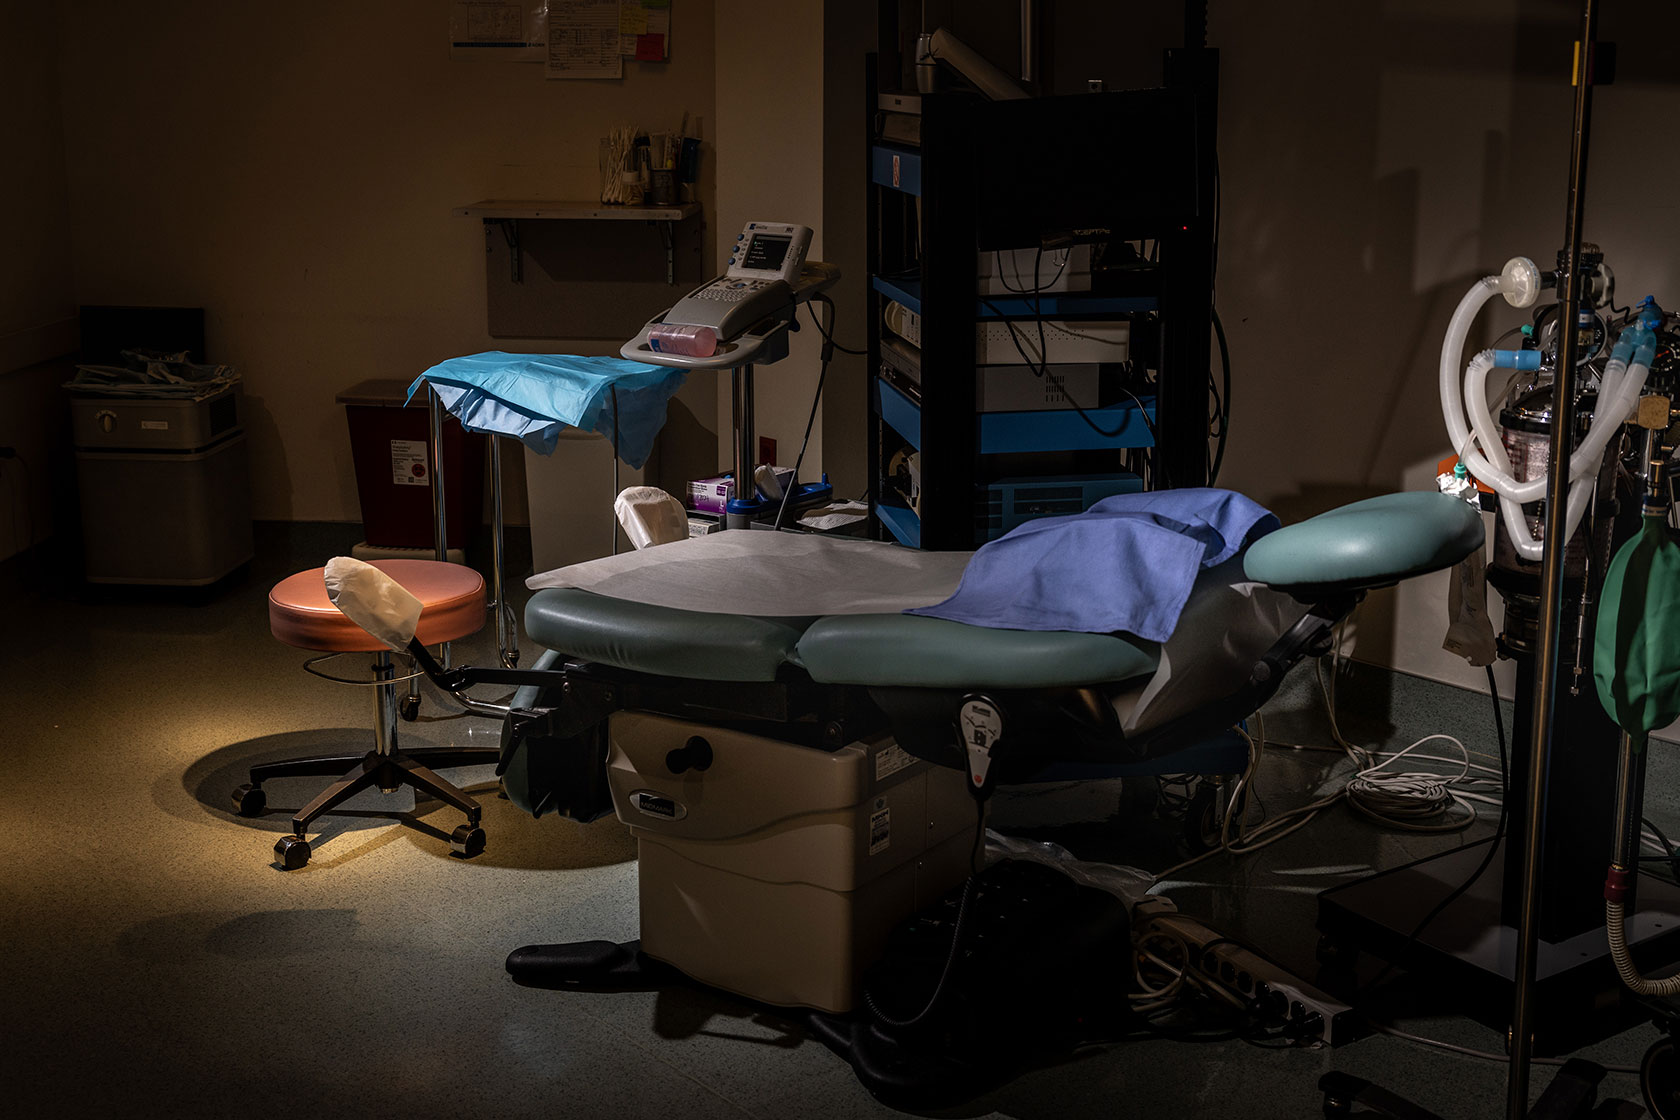 Photo shows equipment and a bed in a procedure room with dim lighting